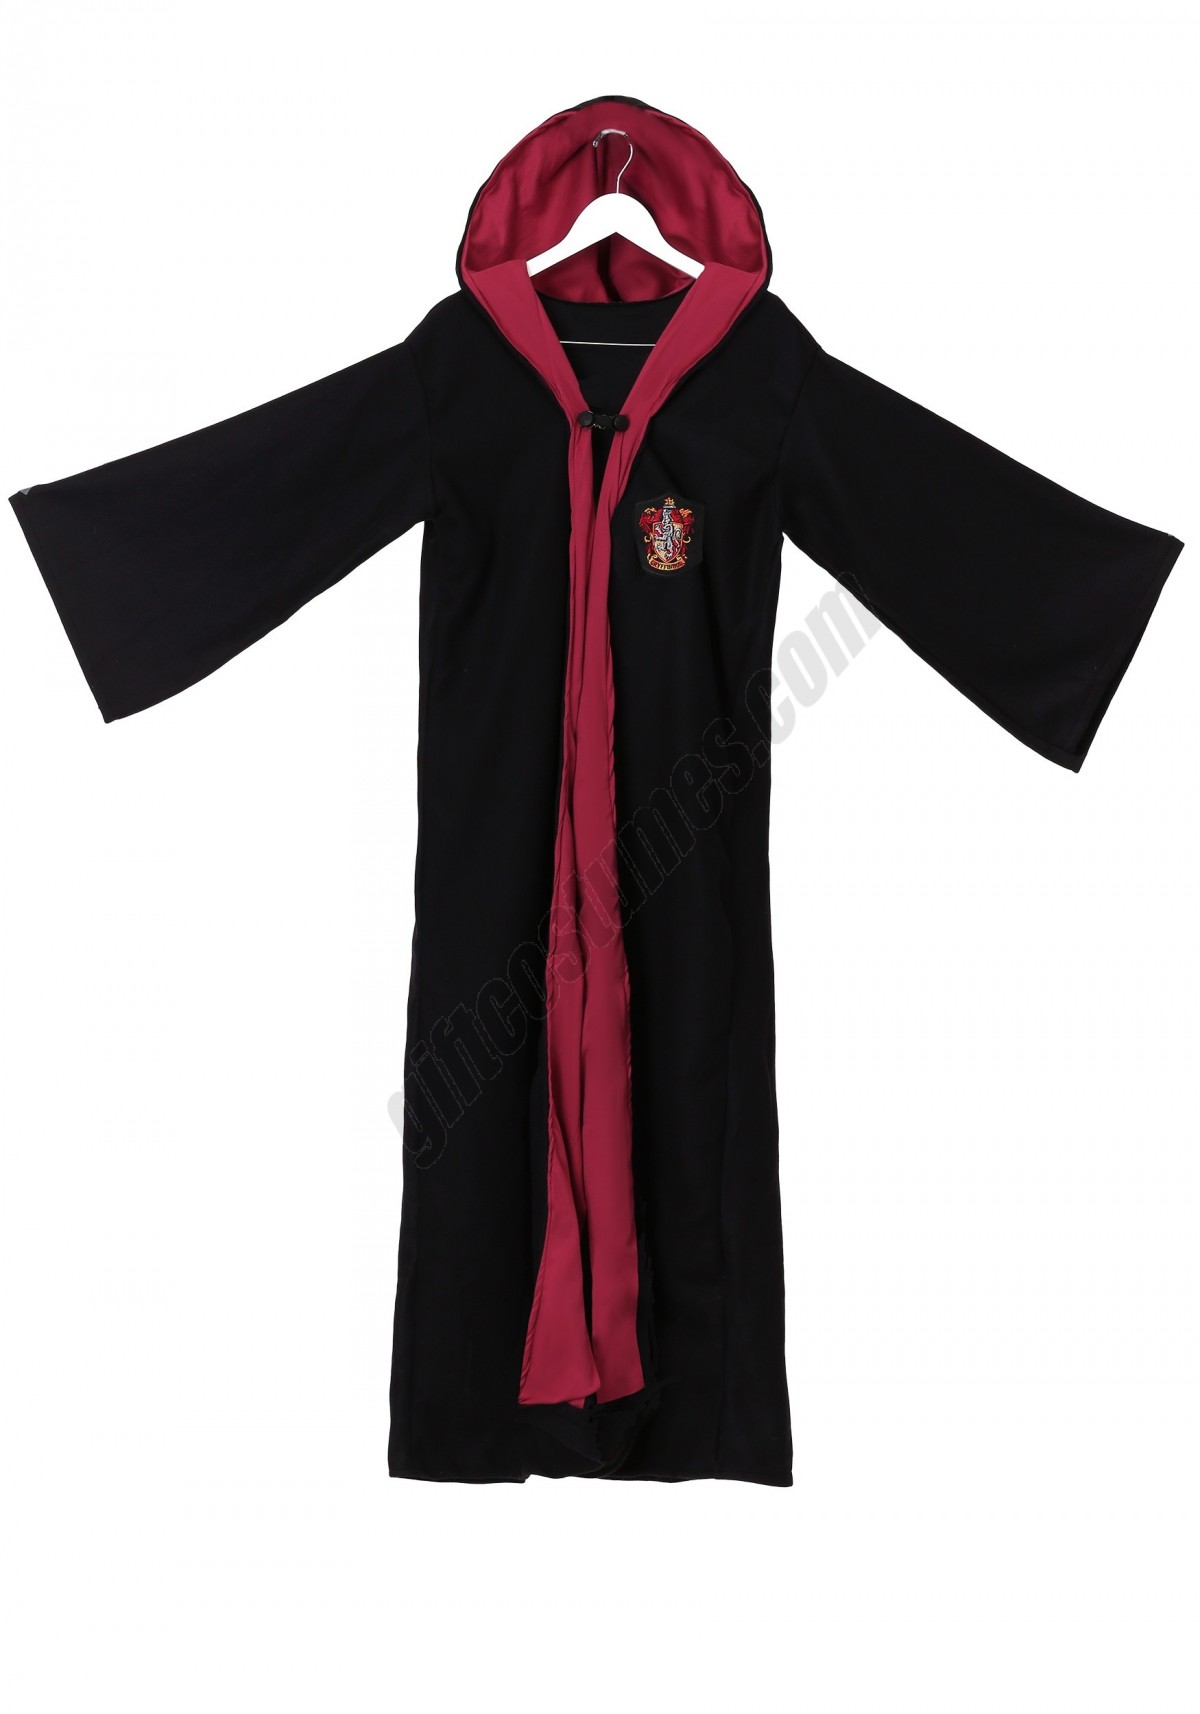 Adult Deluxe Harry Potter Costume Promotions - -2